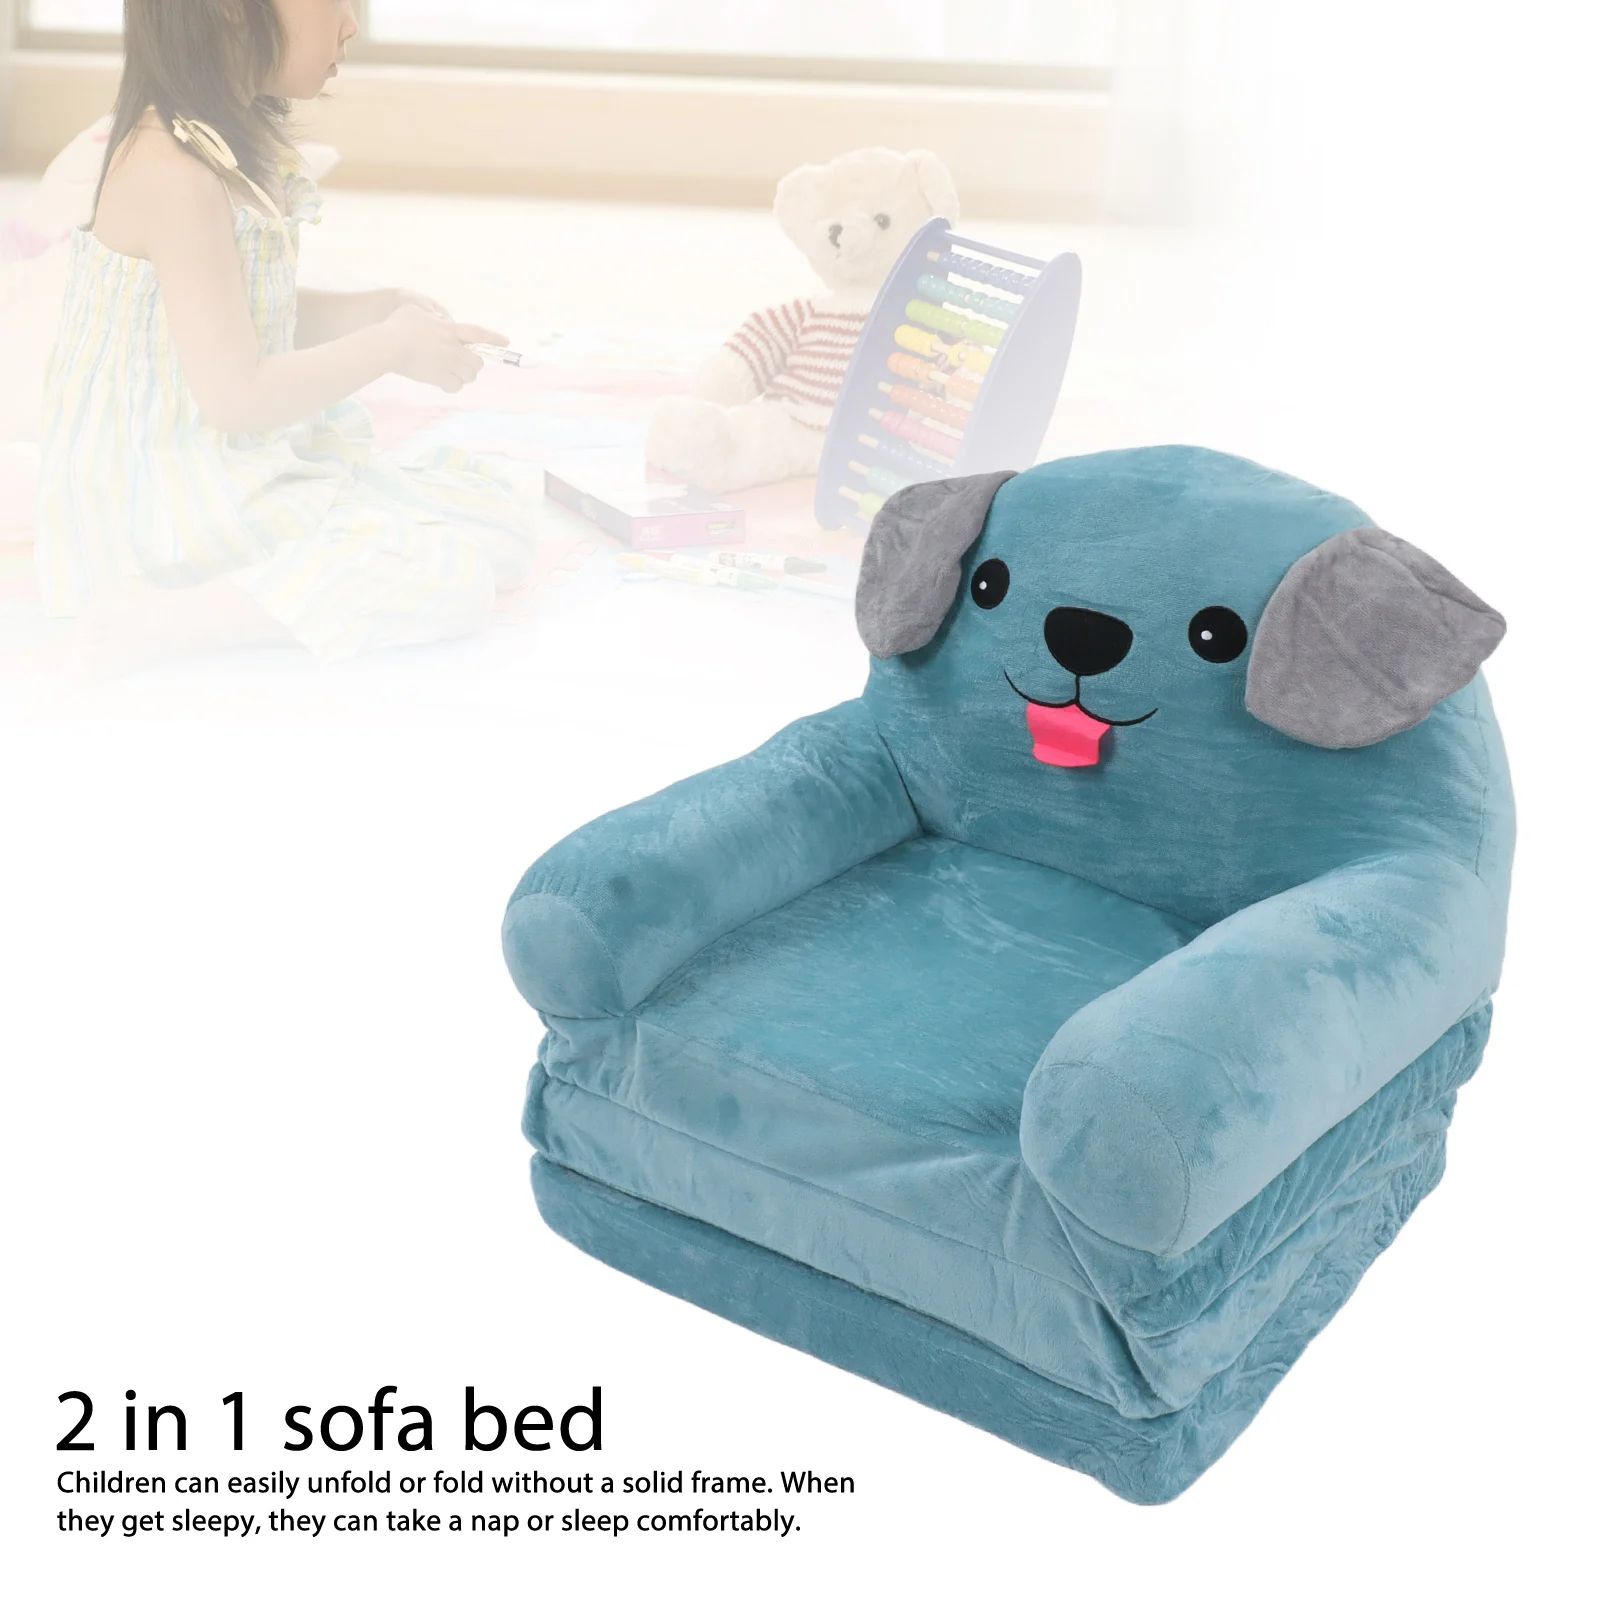 Children Sofa Blue Puppy Children's Sofa Cute Cartoon Folding Small Sofa Bed  Dual Use Child Bean Bag For Kids – Aliexpress Pertaining To 2 In 1 Foldable Children&#039;s Sofa Beds (View 5 of 15)